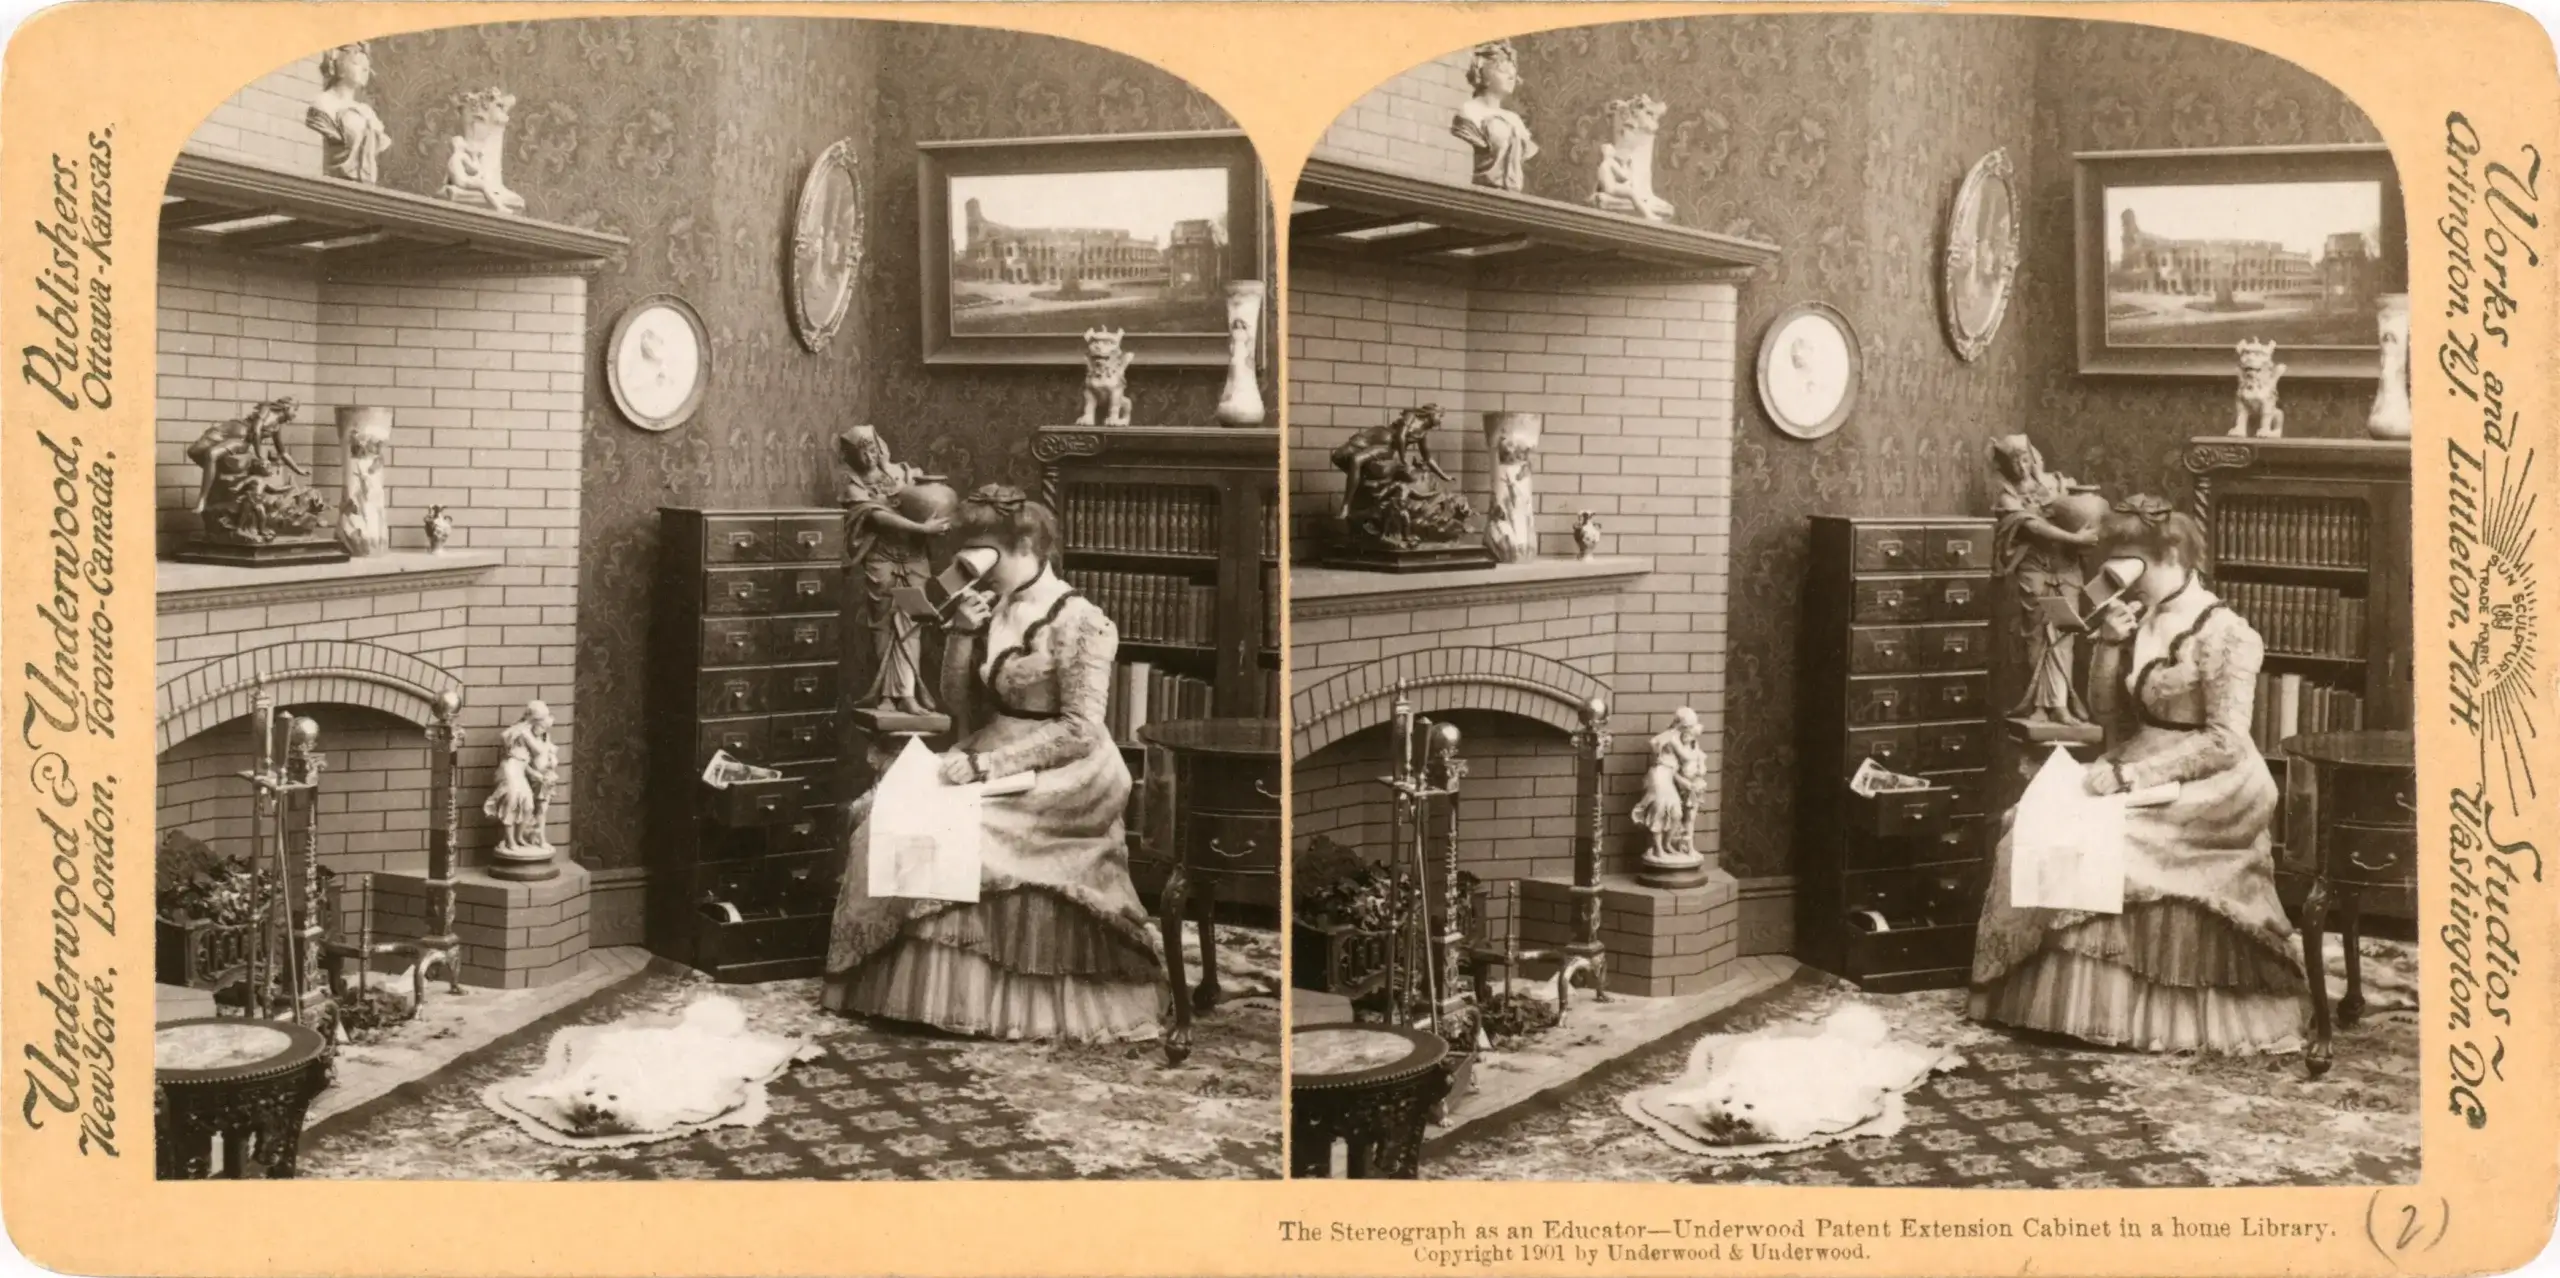 Stereo card of a stereoscope in use (1901) (Source: Wikipedia)